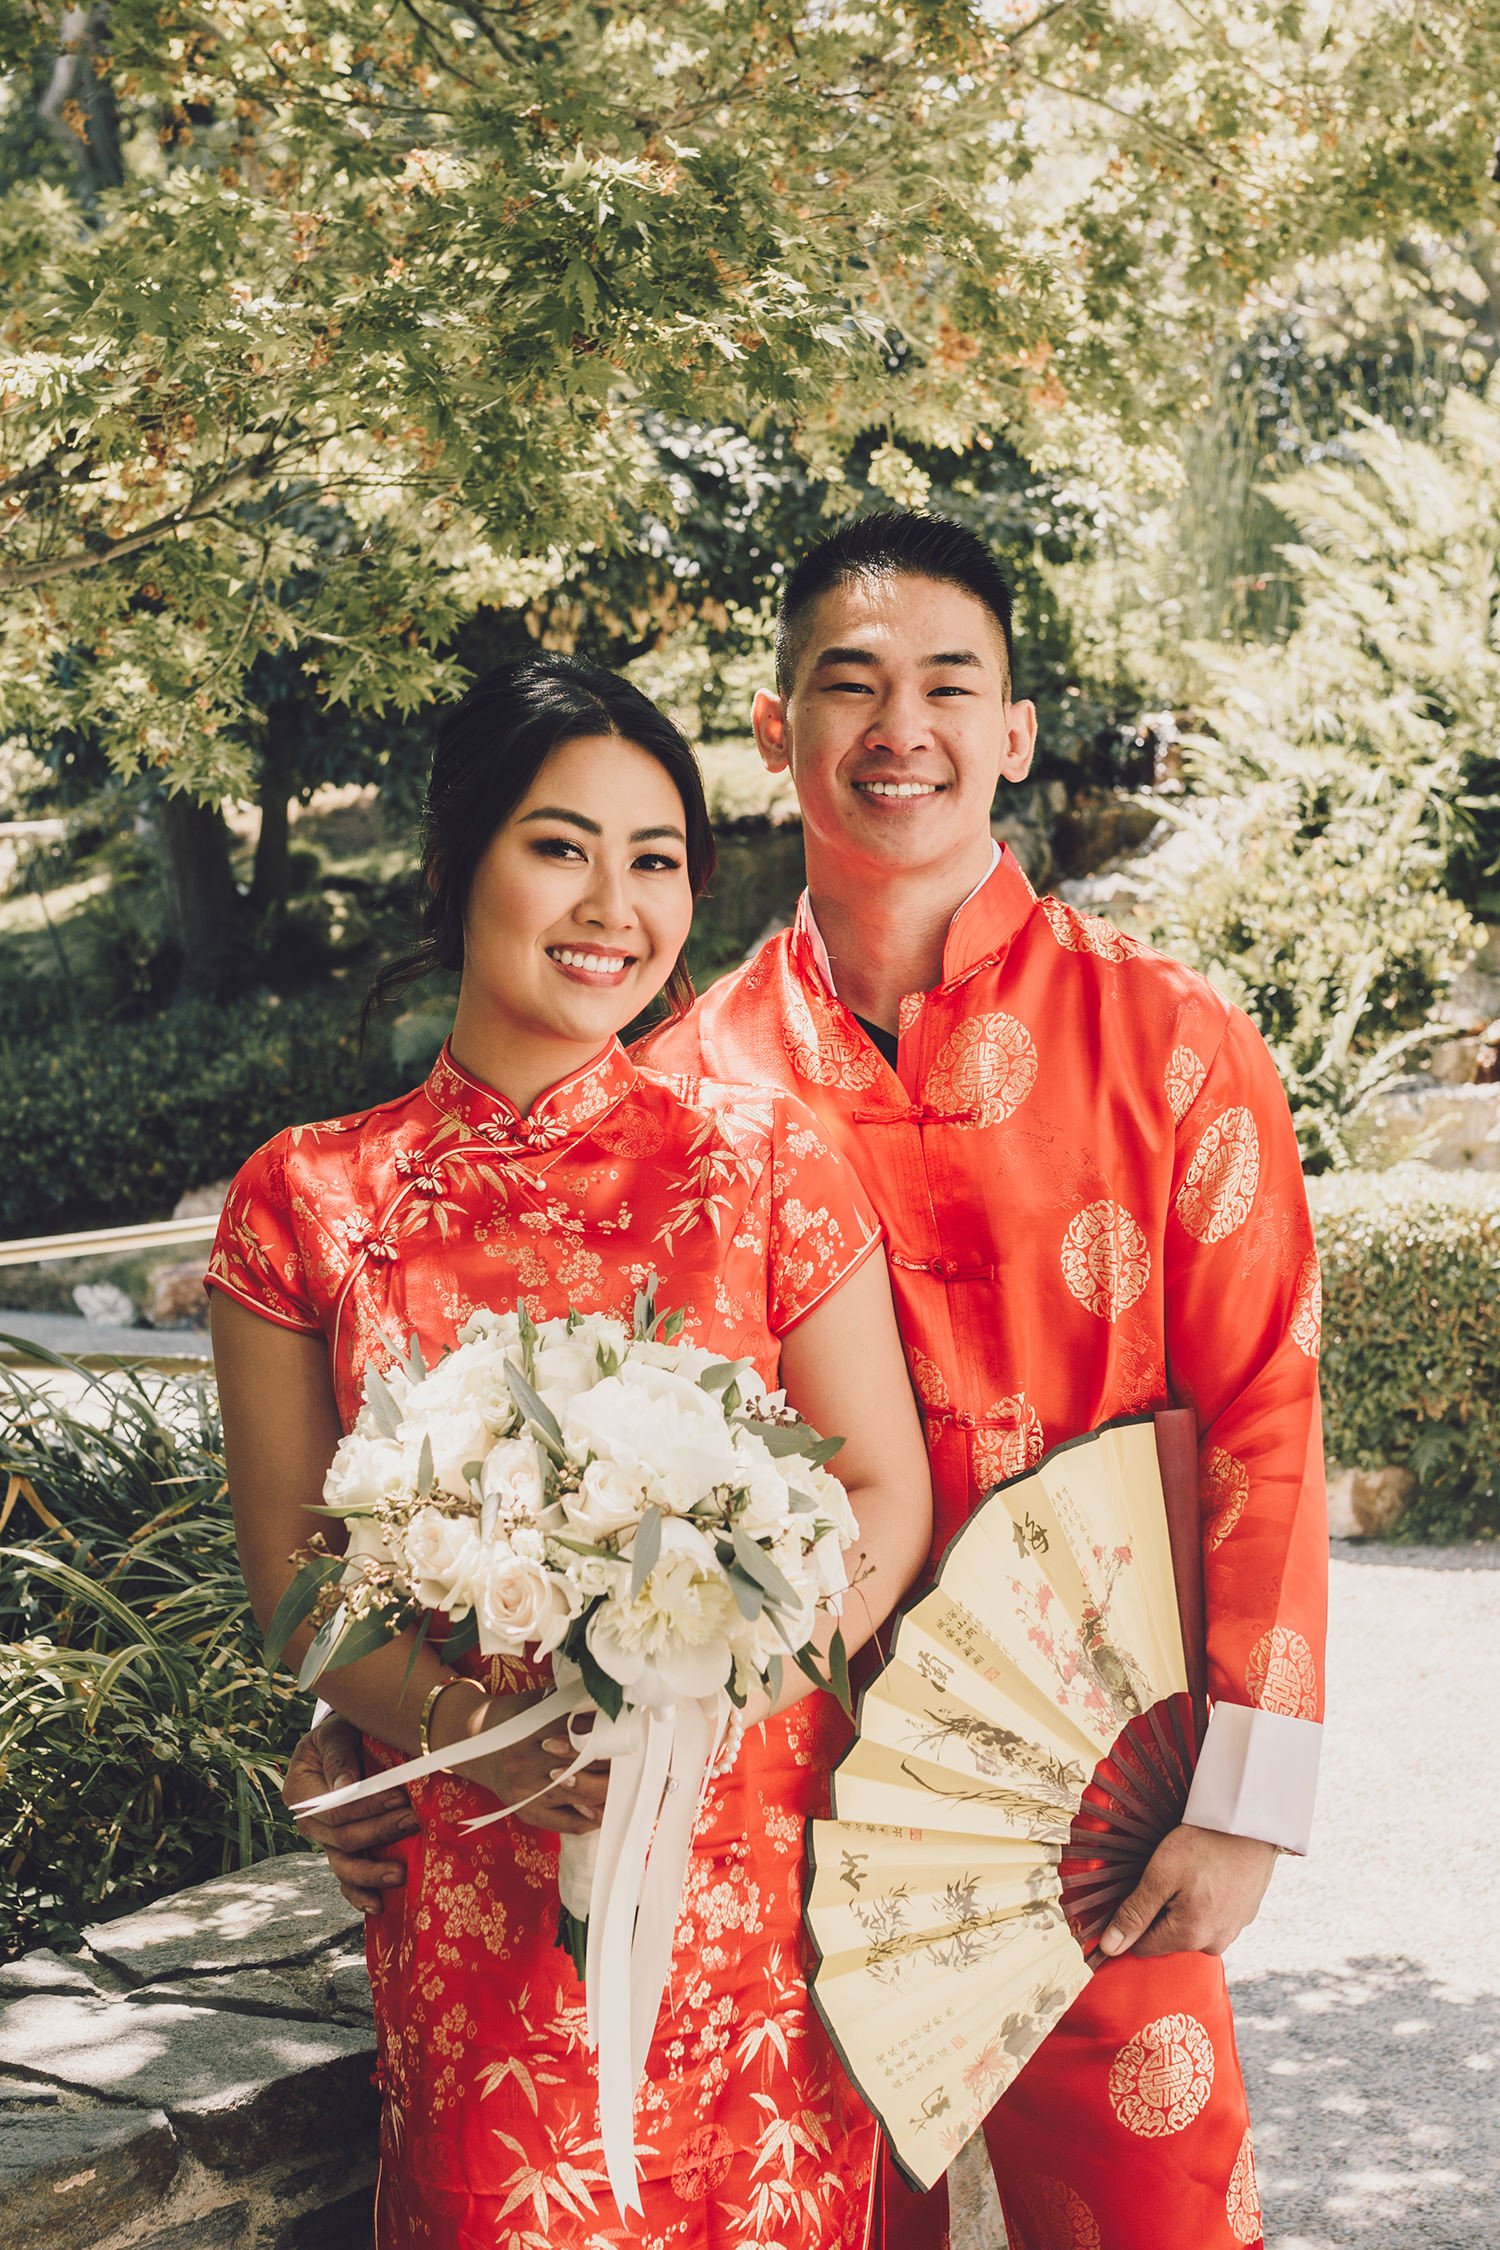 modern-asian-american-wedding-first-look-traditional-chinese-attire-socal-photographer-14.jpg